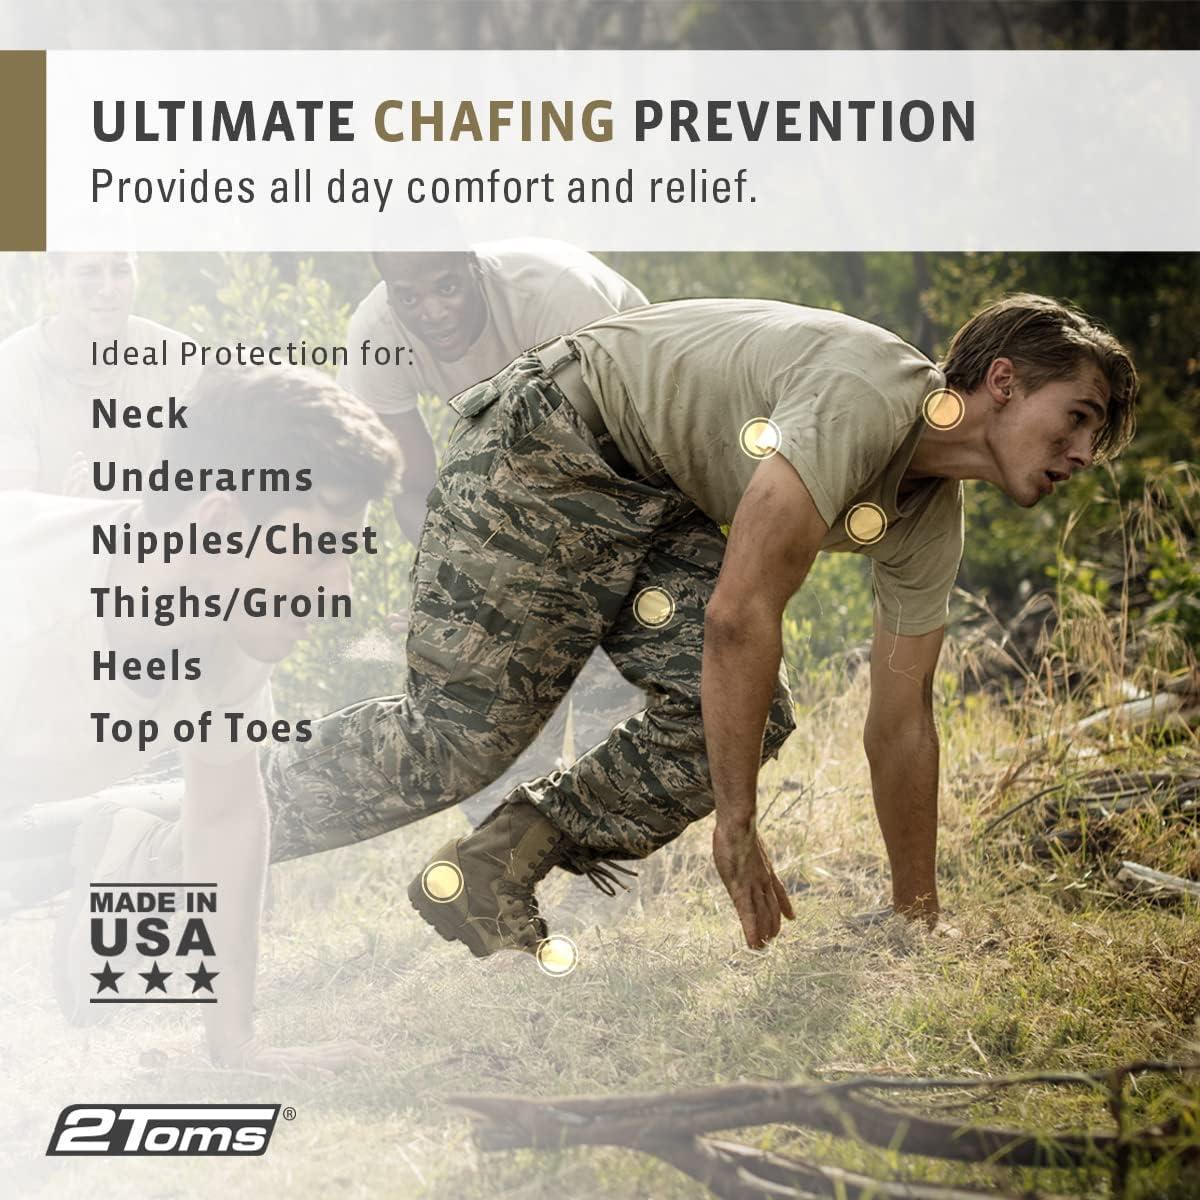 2Toms Chafe Defender Military Grade All-Day Anti-Chafe and Blister  Prevention Waterproof and Sweatproof Protection from Chafing and Skin  Irritation 6-Pack Towelettes